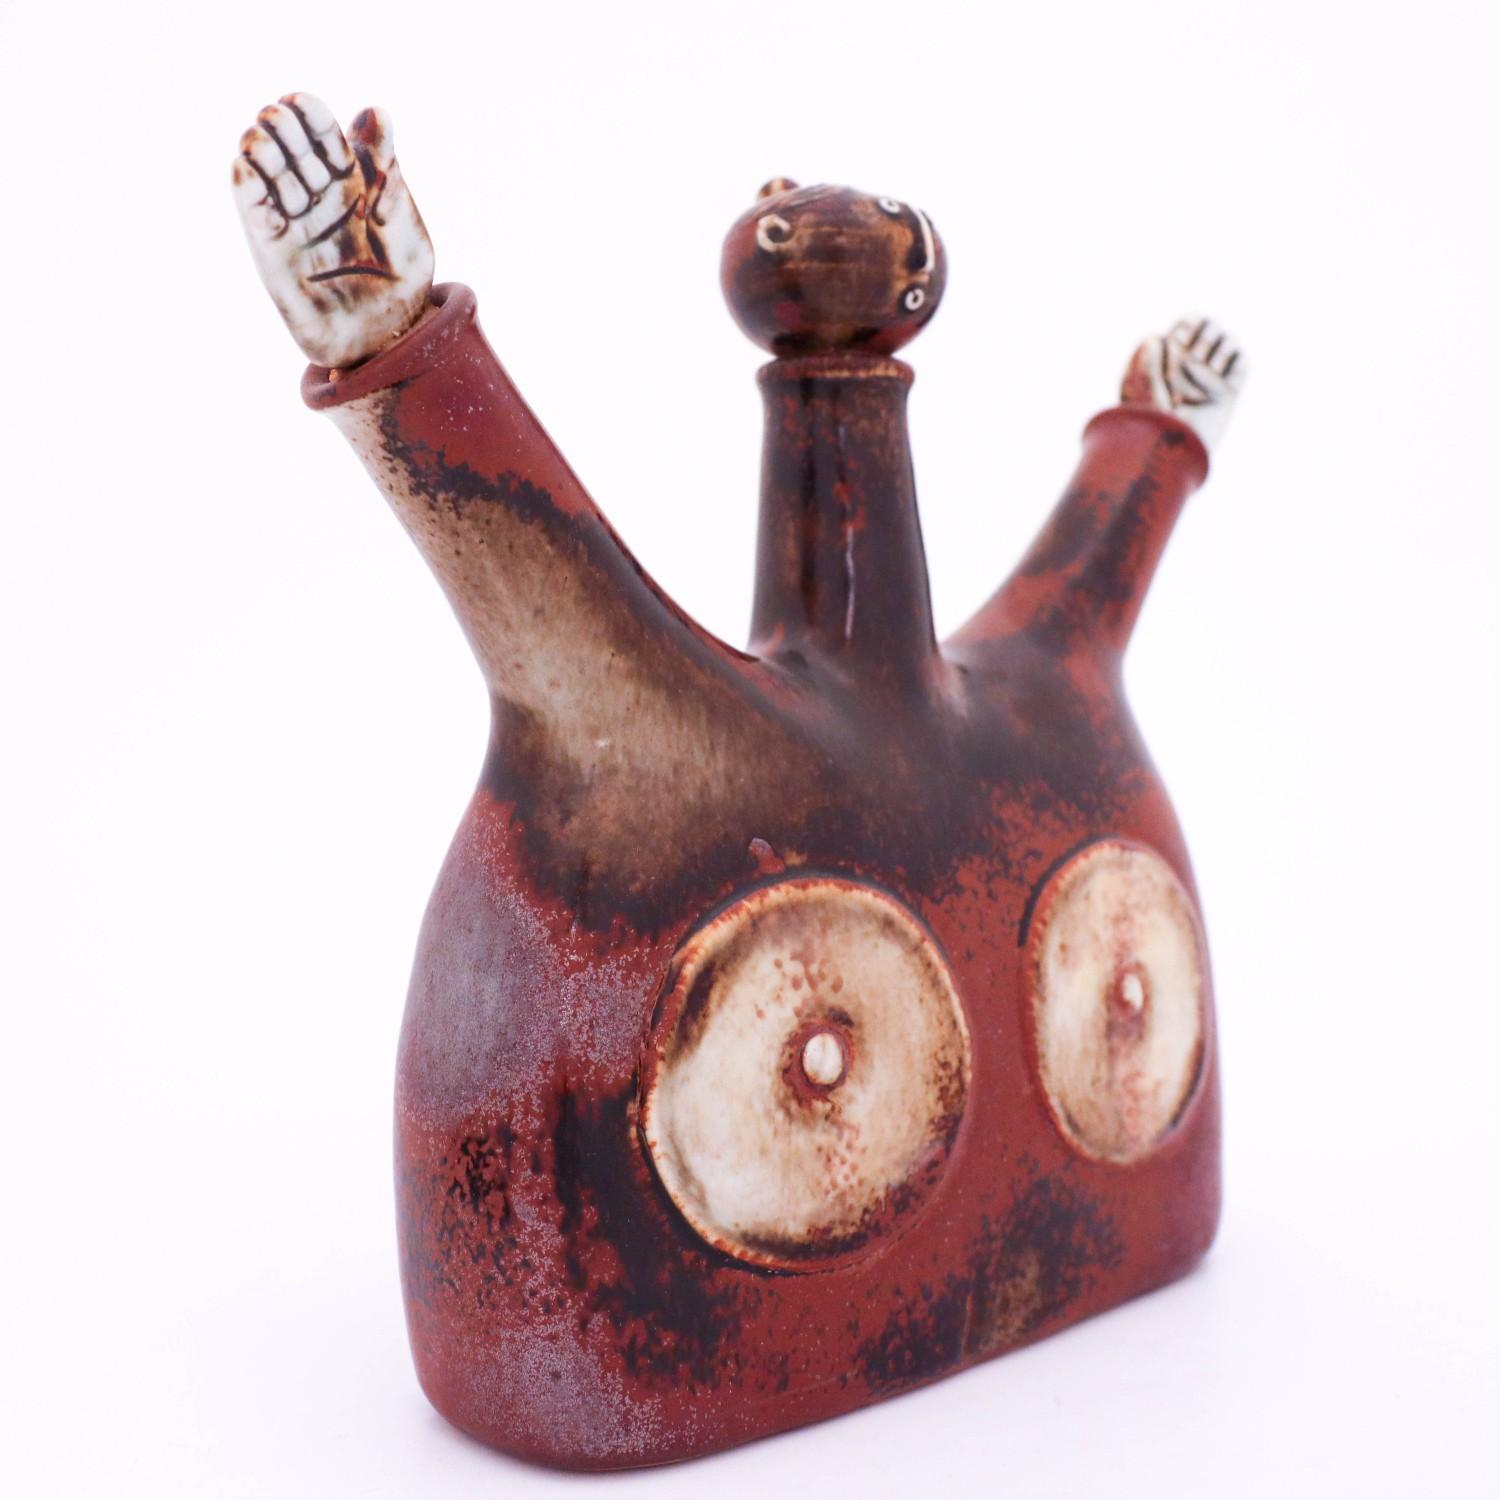 An unusual decanter / sculpture designed by Stig Lindberg at Gustavsbergs studio. It is made in black and brown stoneware and signed below with Stigs signature. The hands and the head is removable from the body.